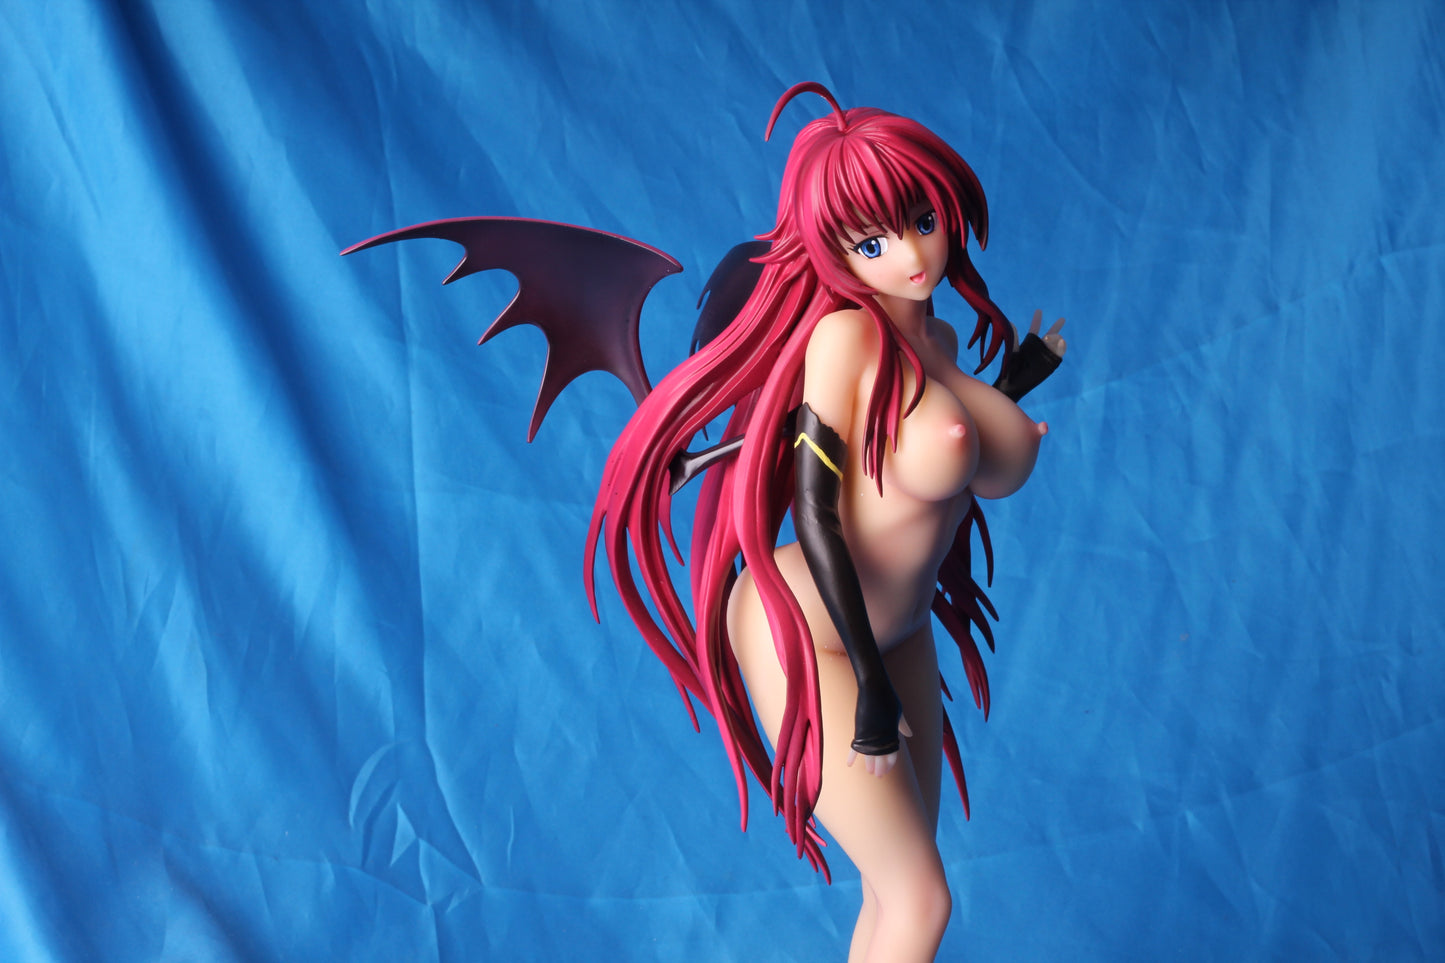 Japanese anime High School DxD Rias Gremory 1/4 naked anime figure sexy resin figure girl